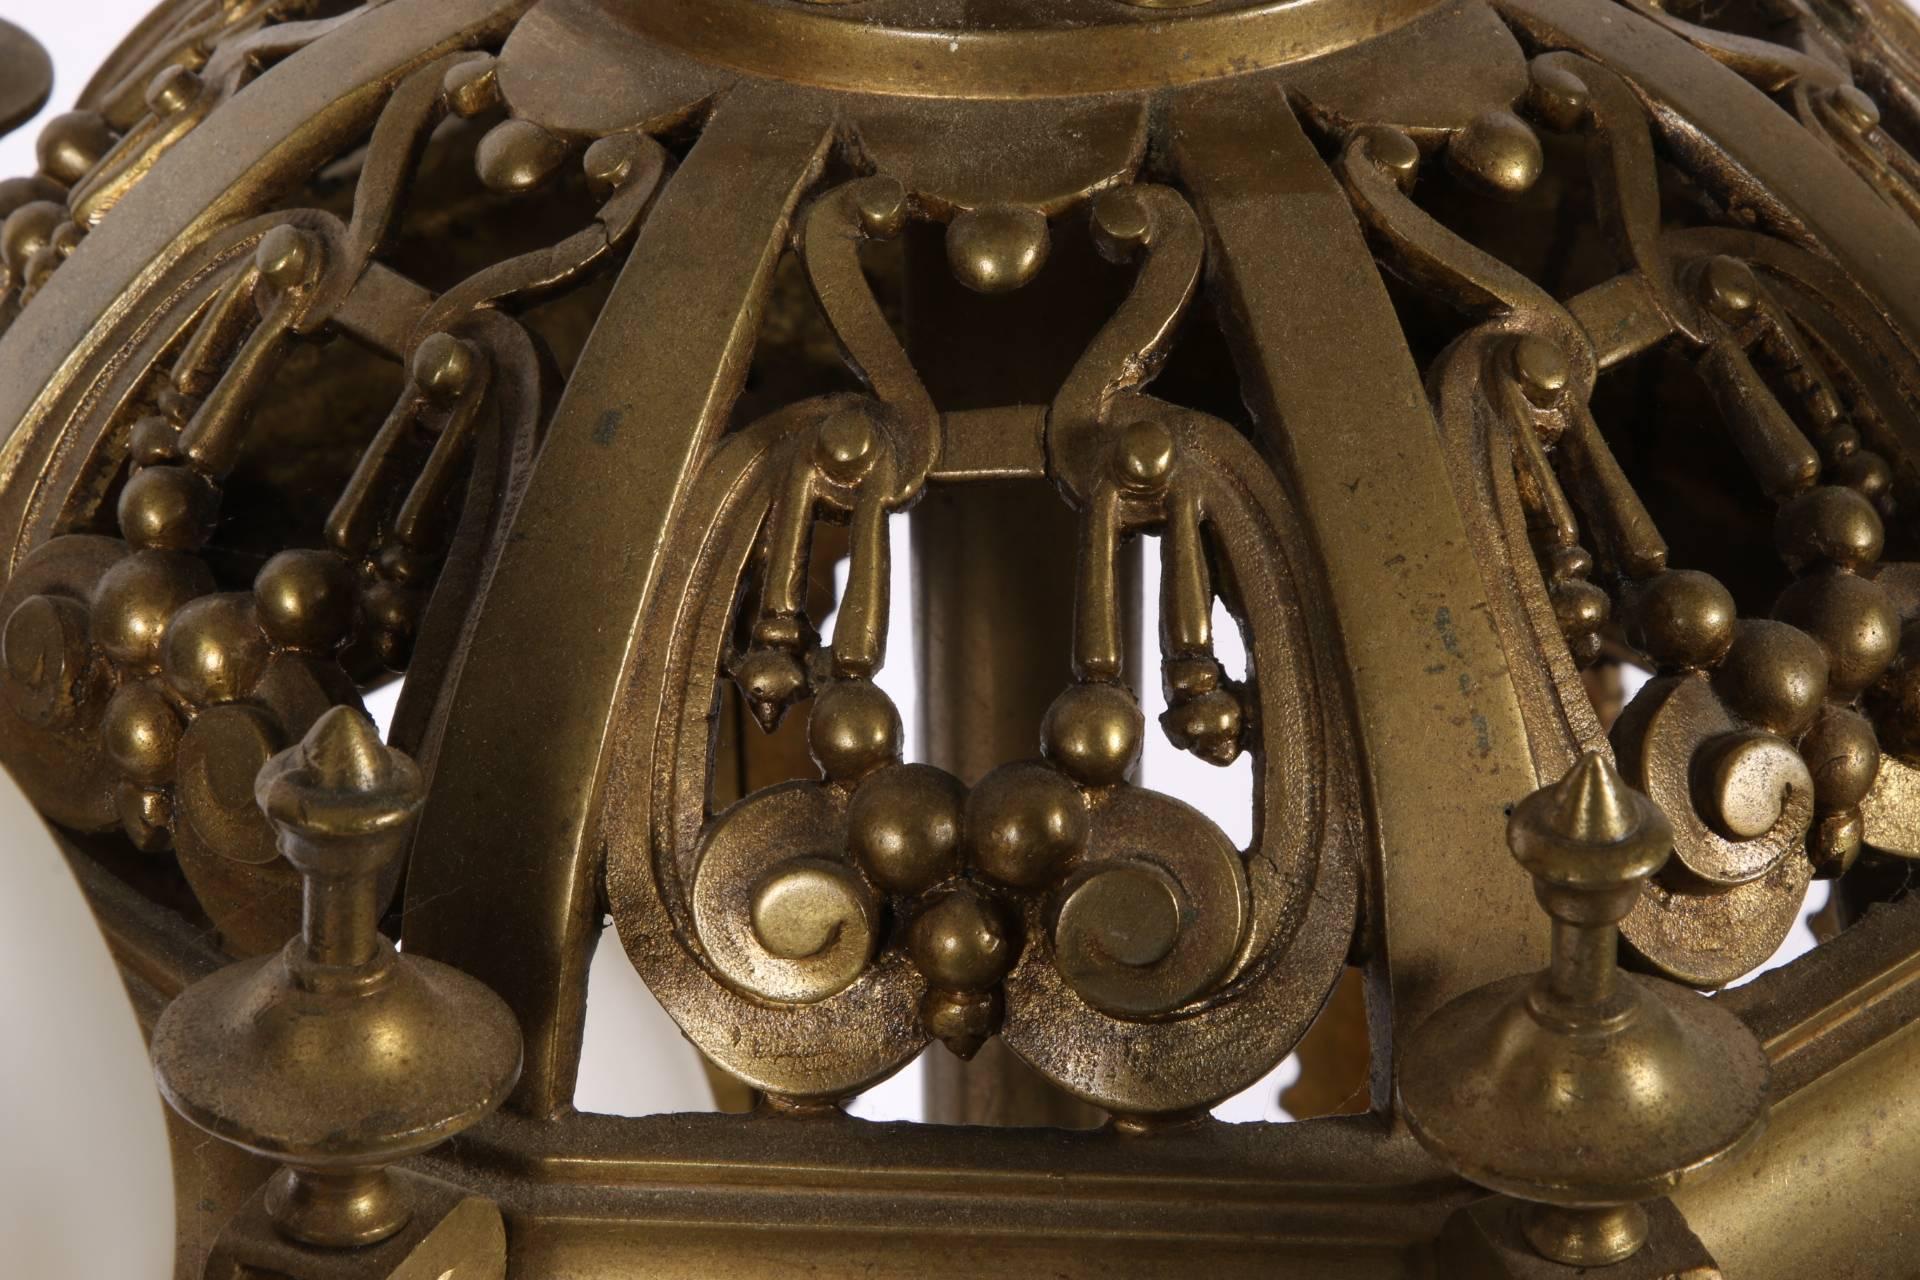 Cast bronze octagonal openwork form with three interior lights and four outer attached openwork arms with candle socket lights. A domical openwork top with column supports for the upper tiers and a leafy finial. Mounted on a tall base screwed onto a